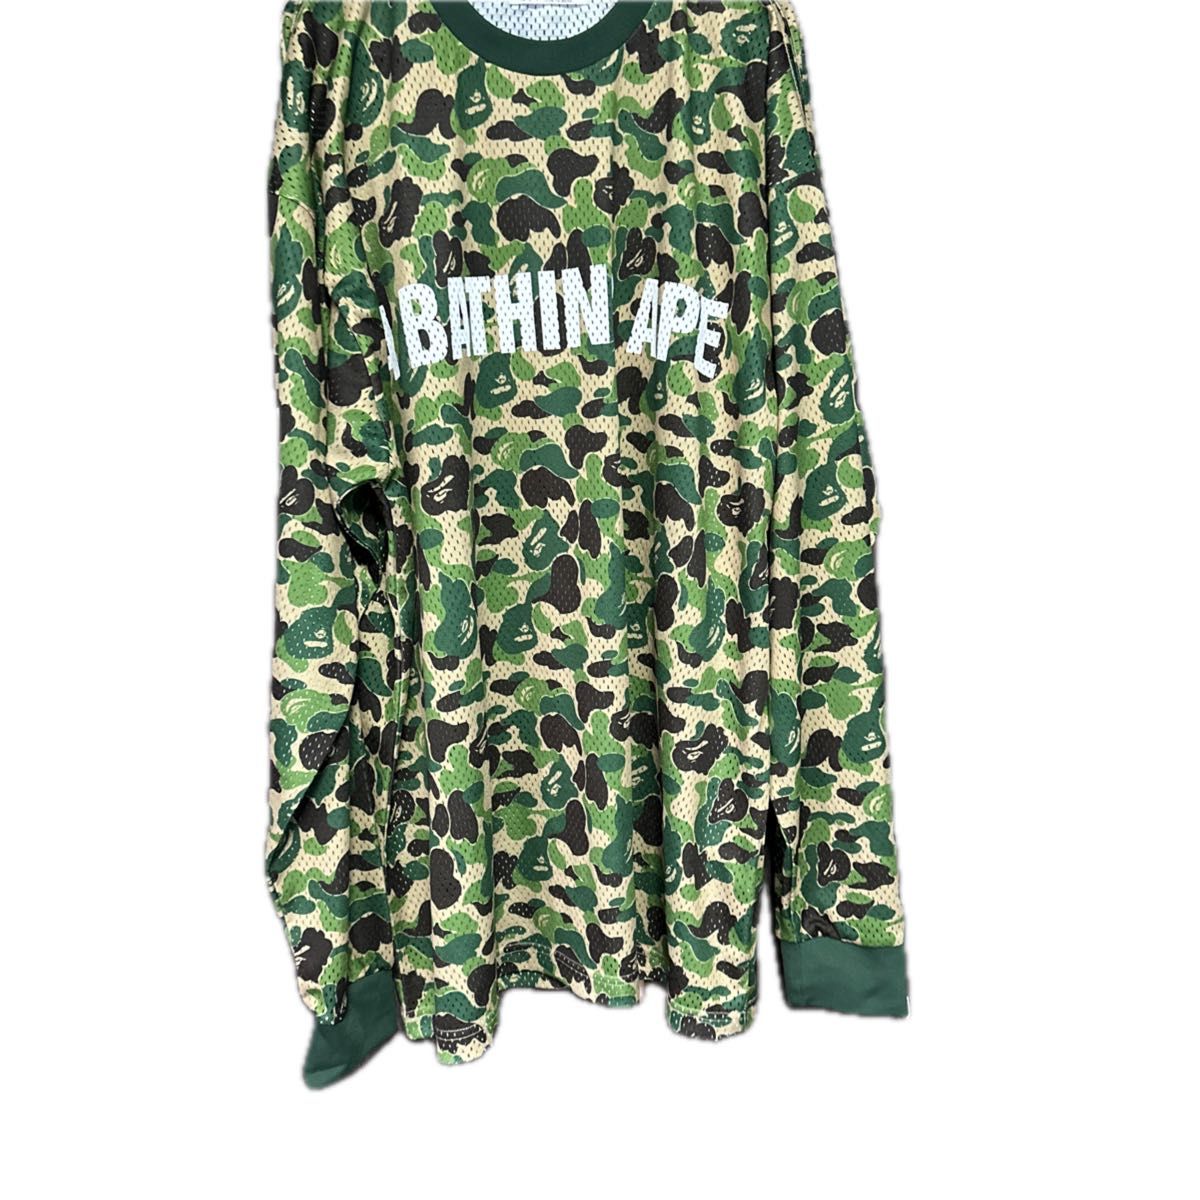 【A BATHING APE】 ABC CAMO MESH RELAXED FIT L/S TEE M